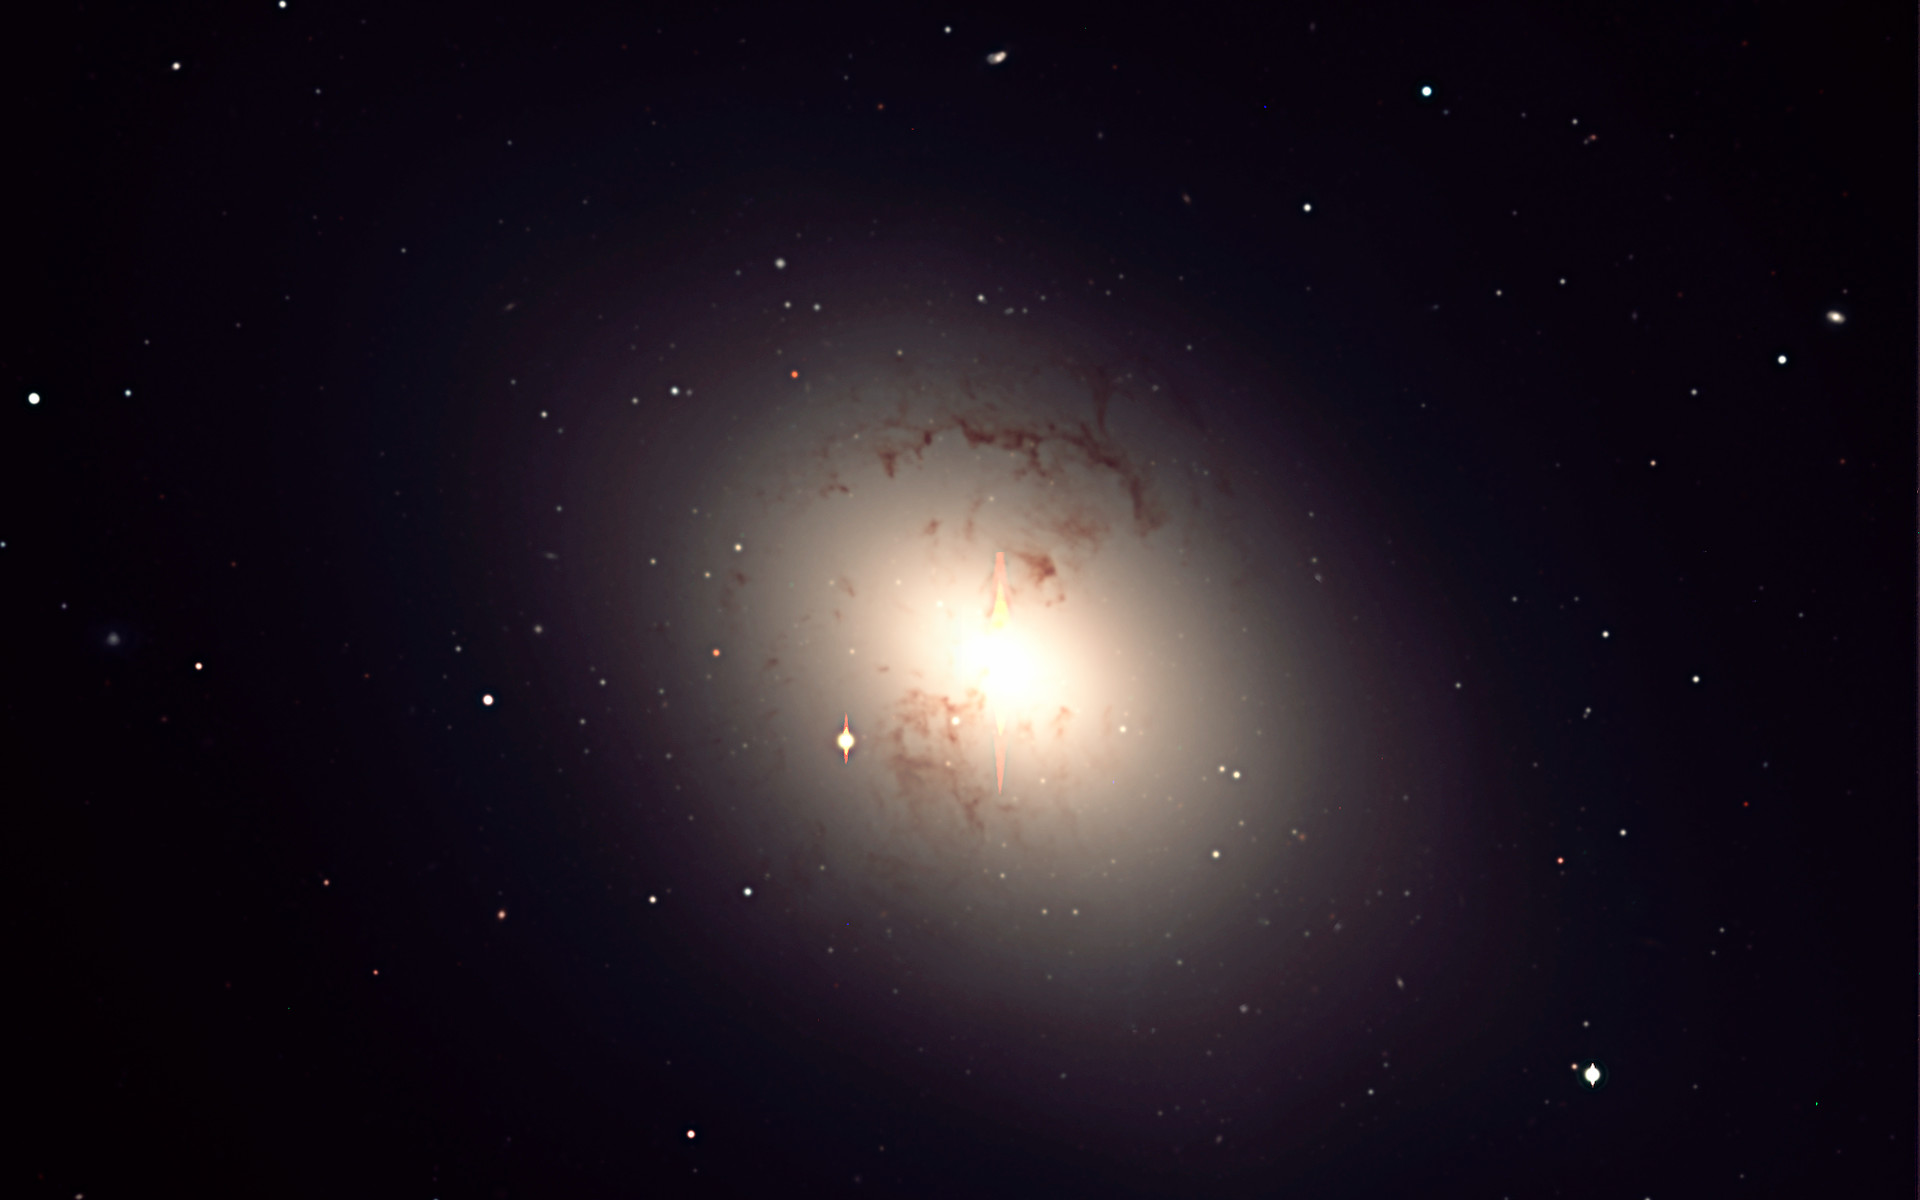 Giant elliptical galaxy NGC 1316 in Fornax Cluster